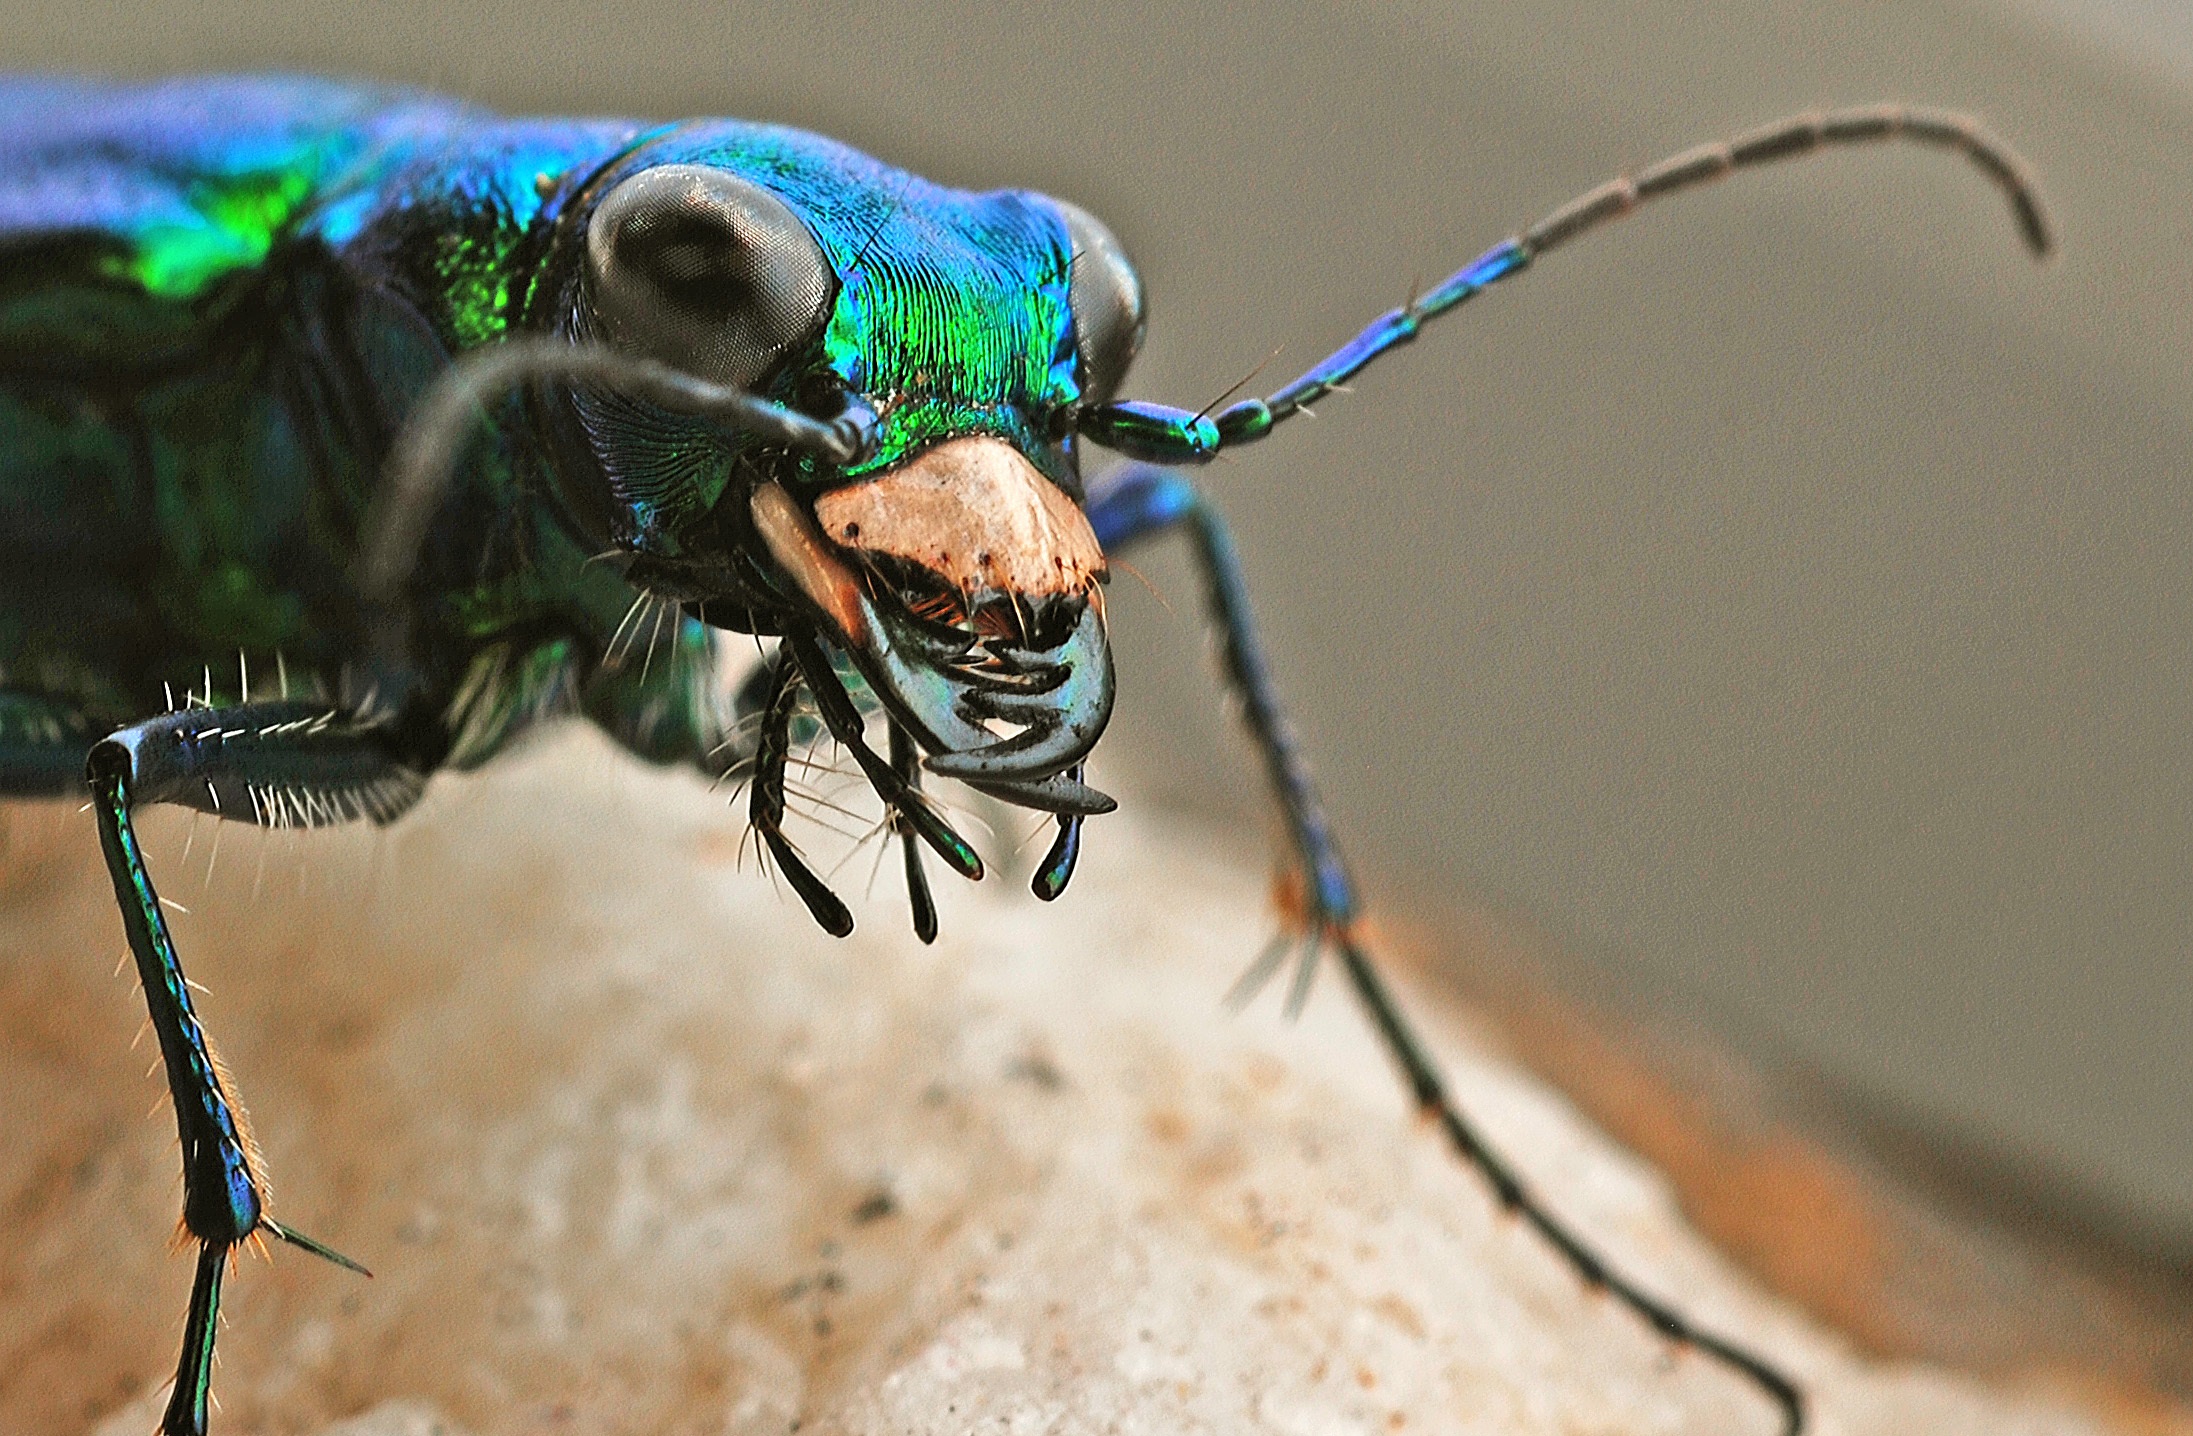 Tiger Beetles: The Quick and The Dead